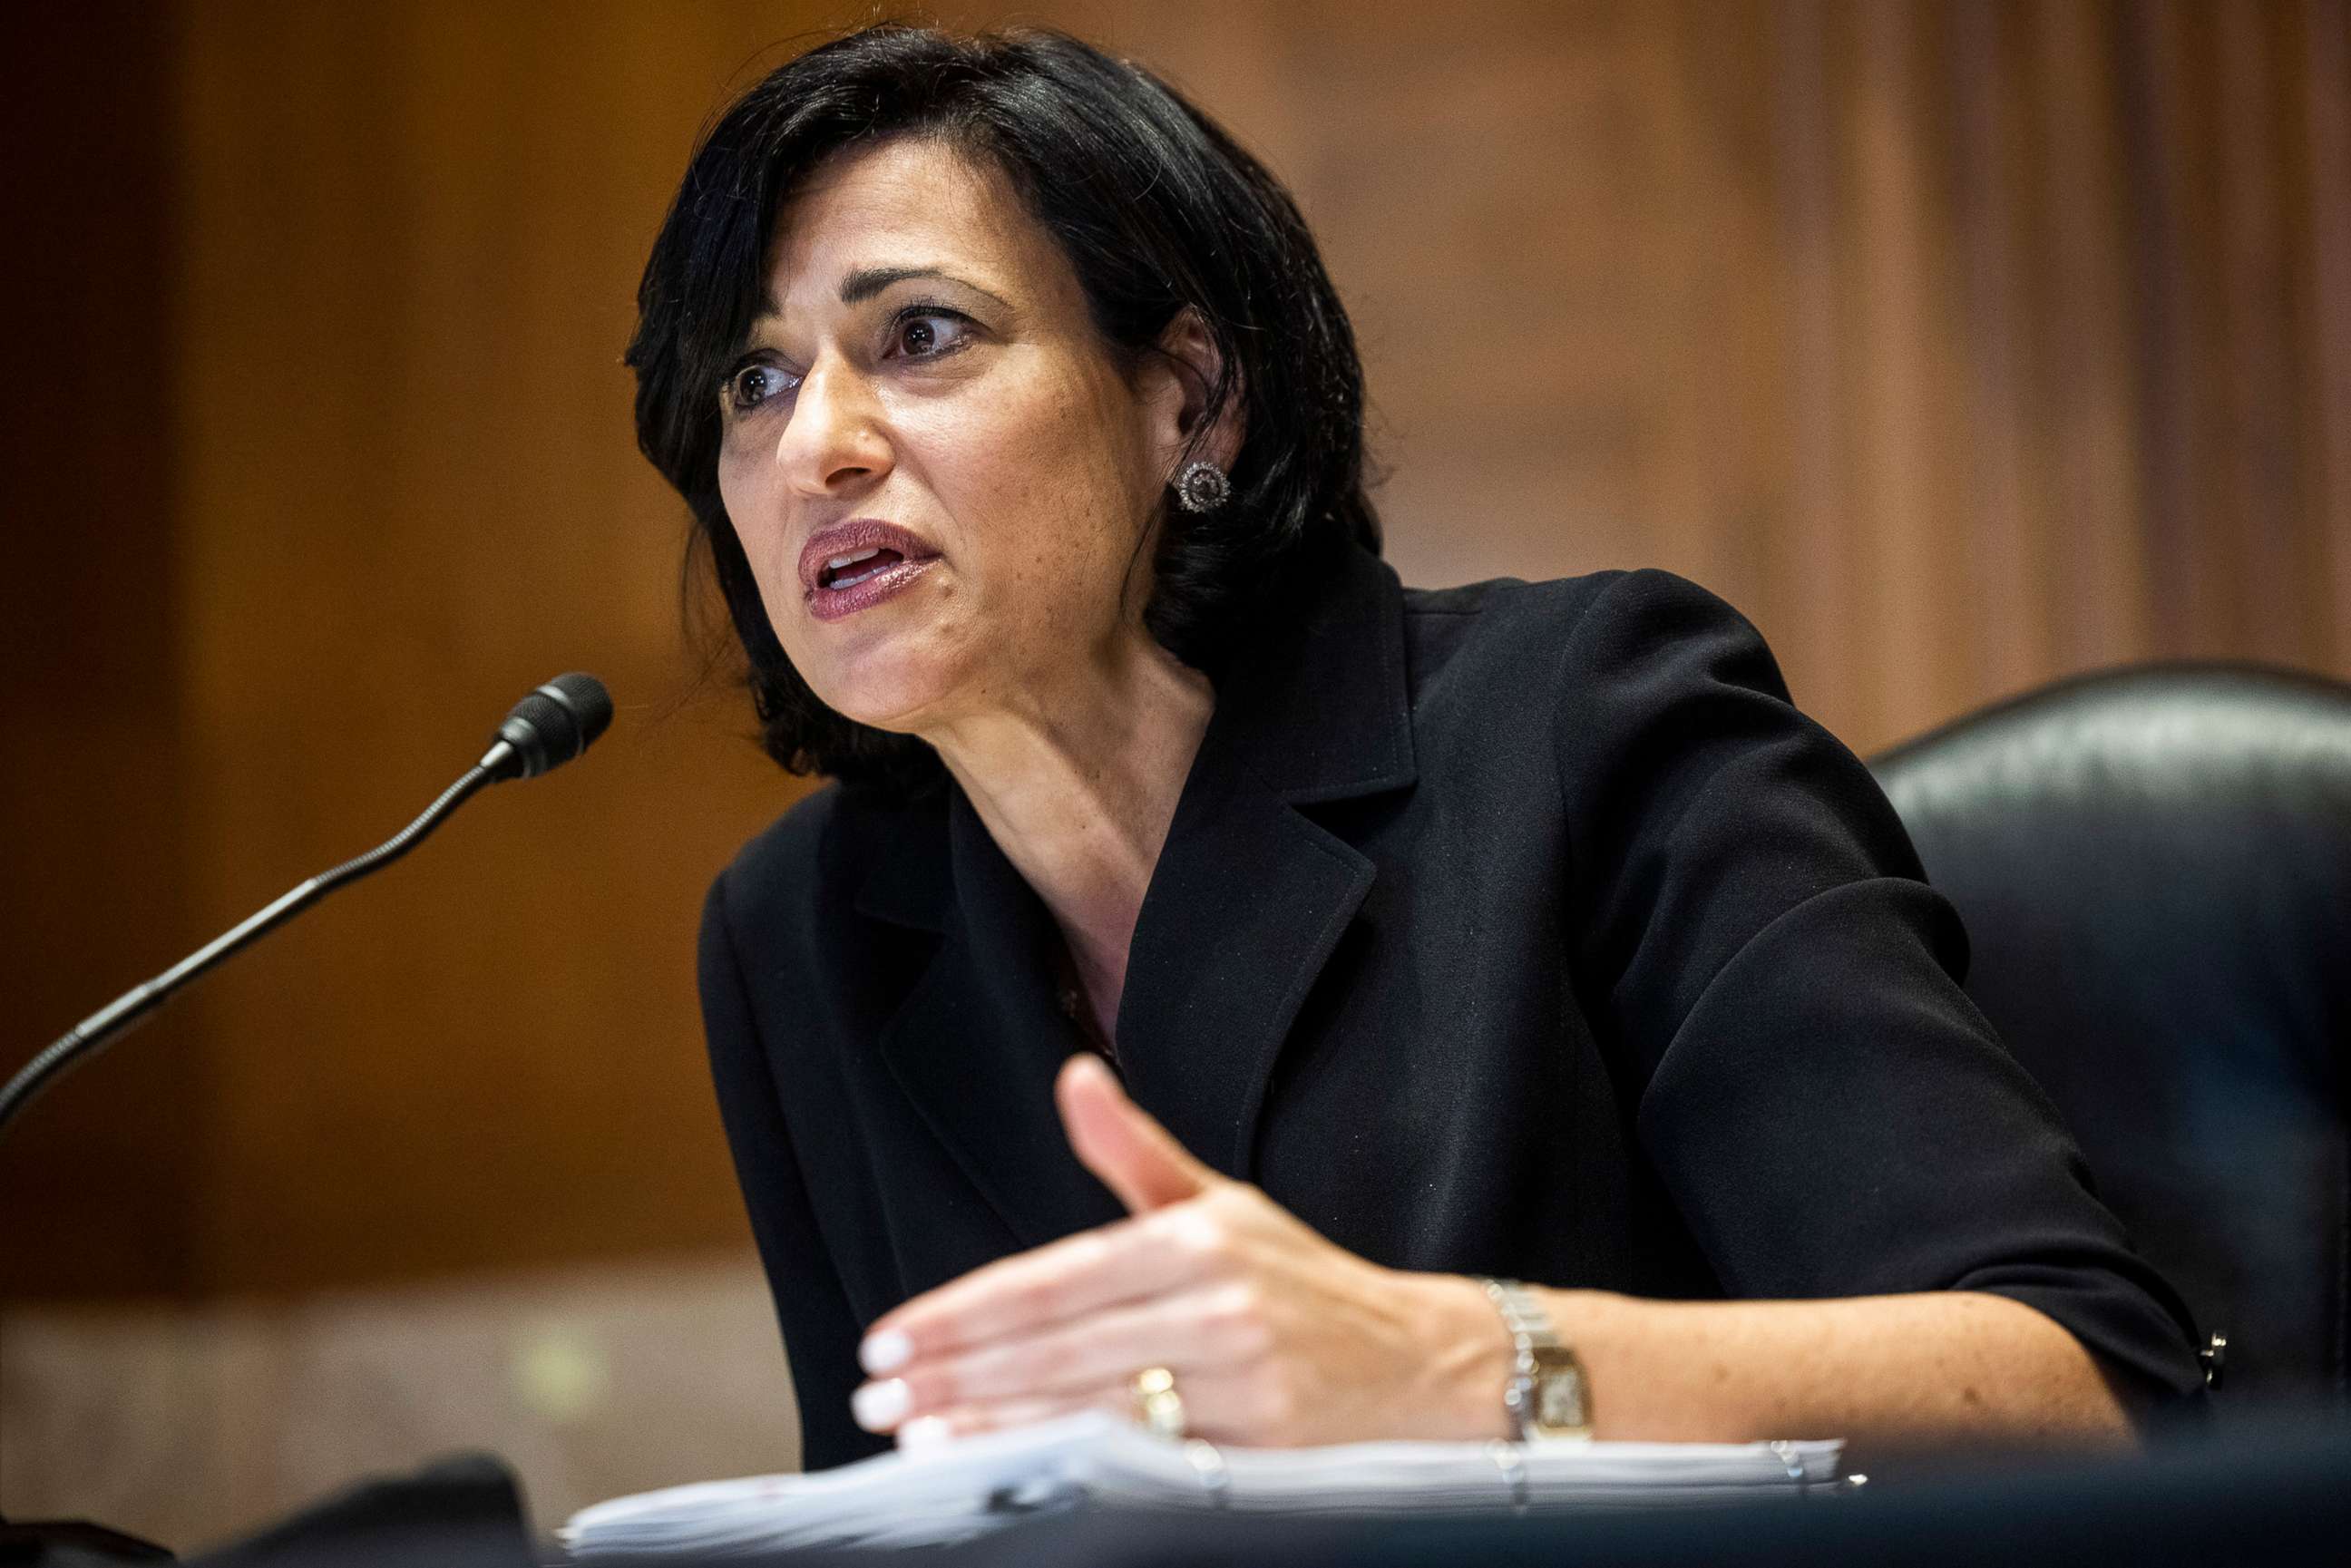 PHOTO: Director of the Centers for Disease Control and Prevention Dr. Rochelle Walensky testifies during a Senate Appropriations Subcommittee hearing in the Dirksen Senate Office Building, May 19, 2021, in Washington, D.C.